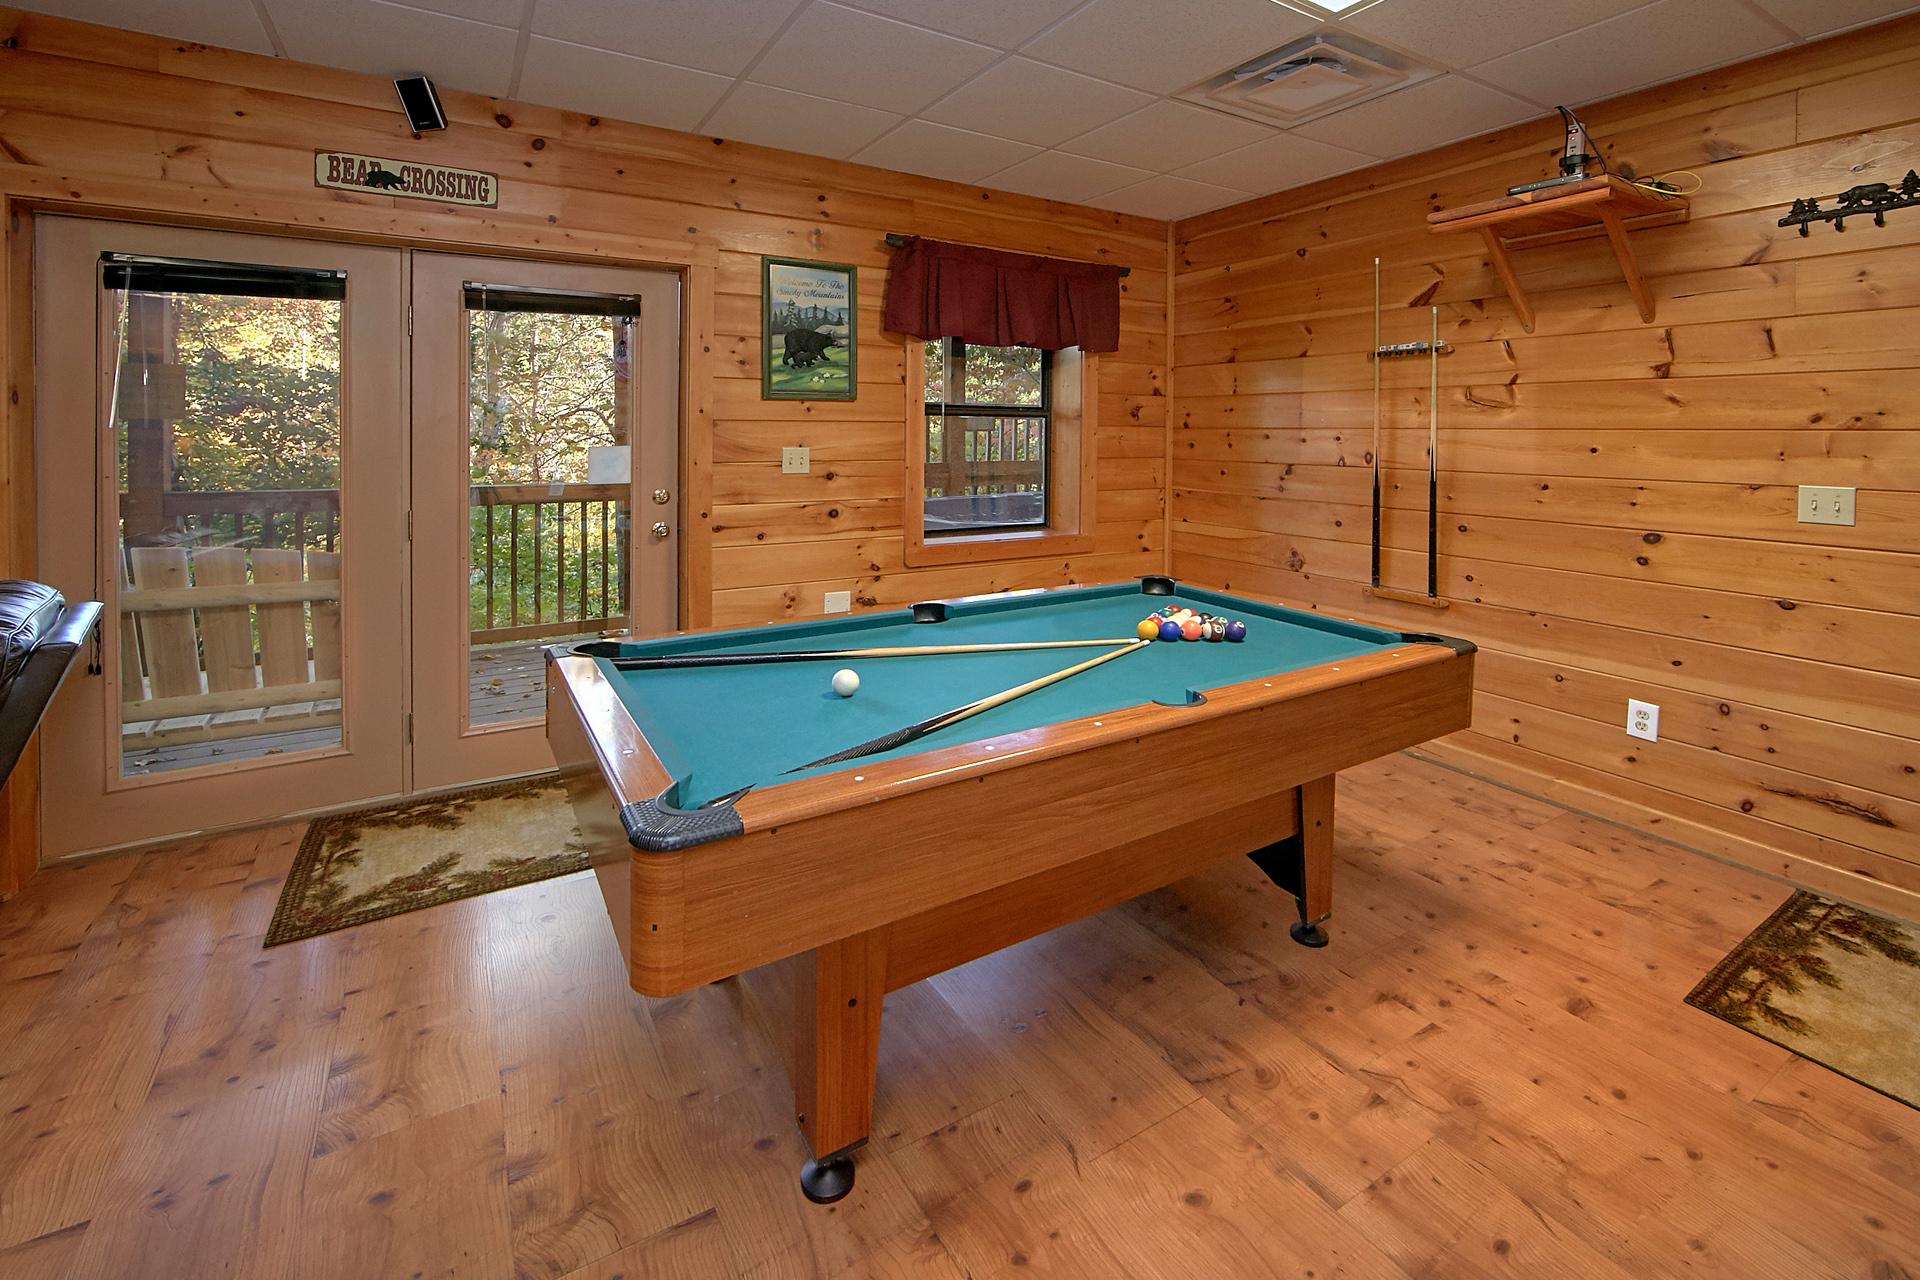 Shoot billiards with kids or adults for fantastic fun on your cabin vacation. Awesome game room fun at Boulder Bear!